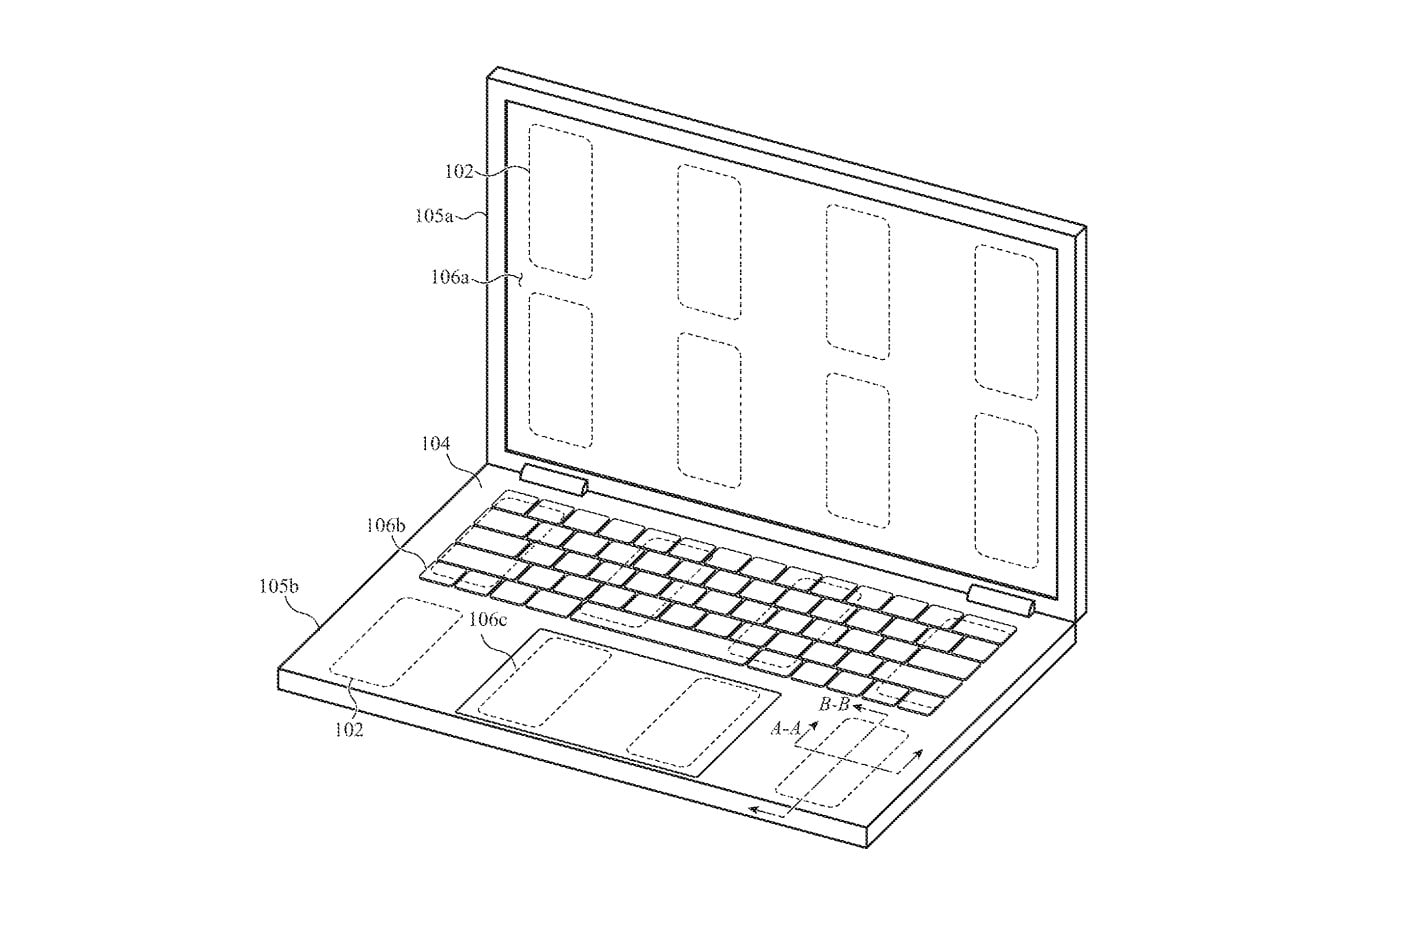 An image from an Apple patent showing a MacBook laptop equipped with various haptic sensors underneath the display, keyboard, trackpad and wrist rest area.